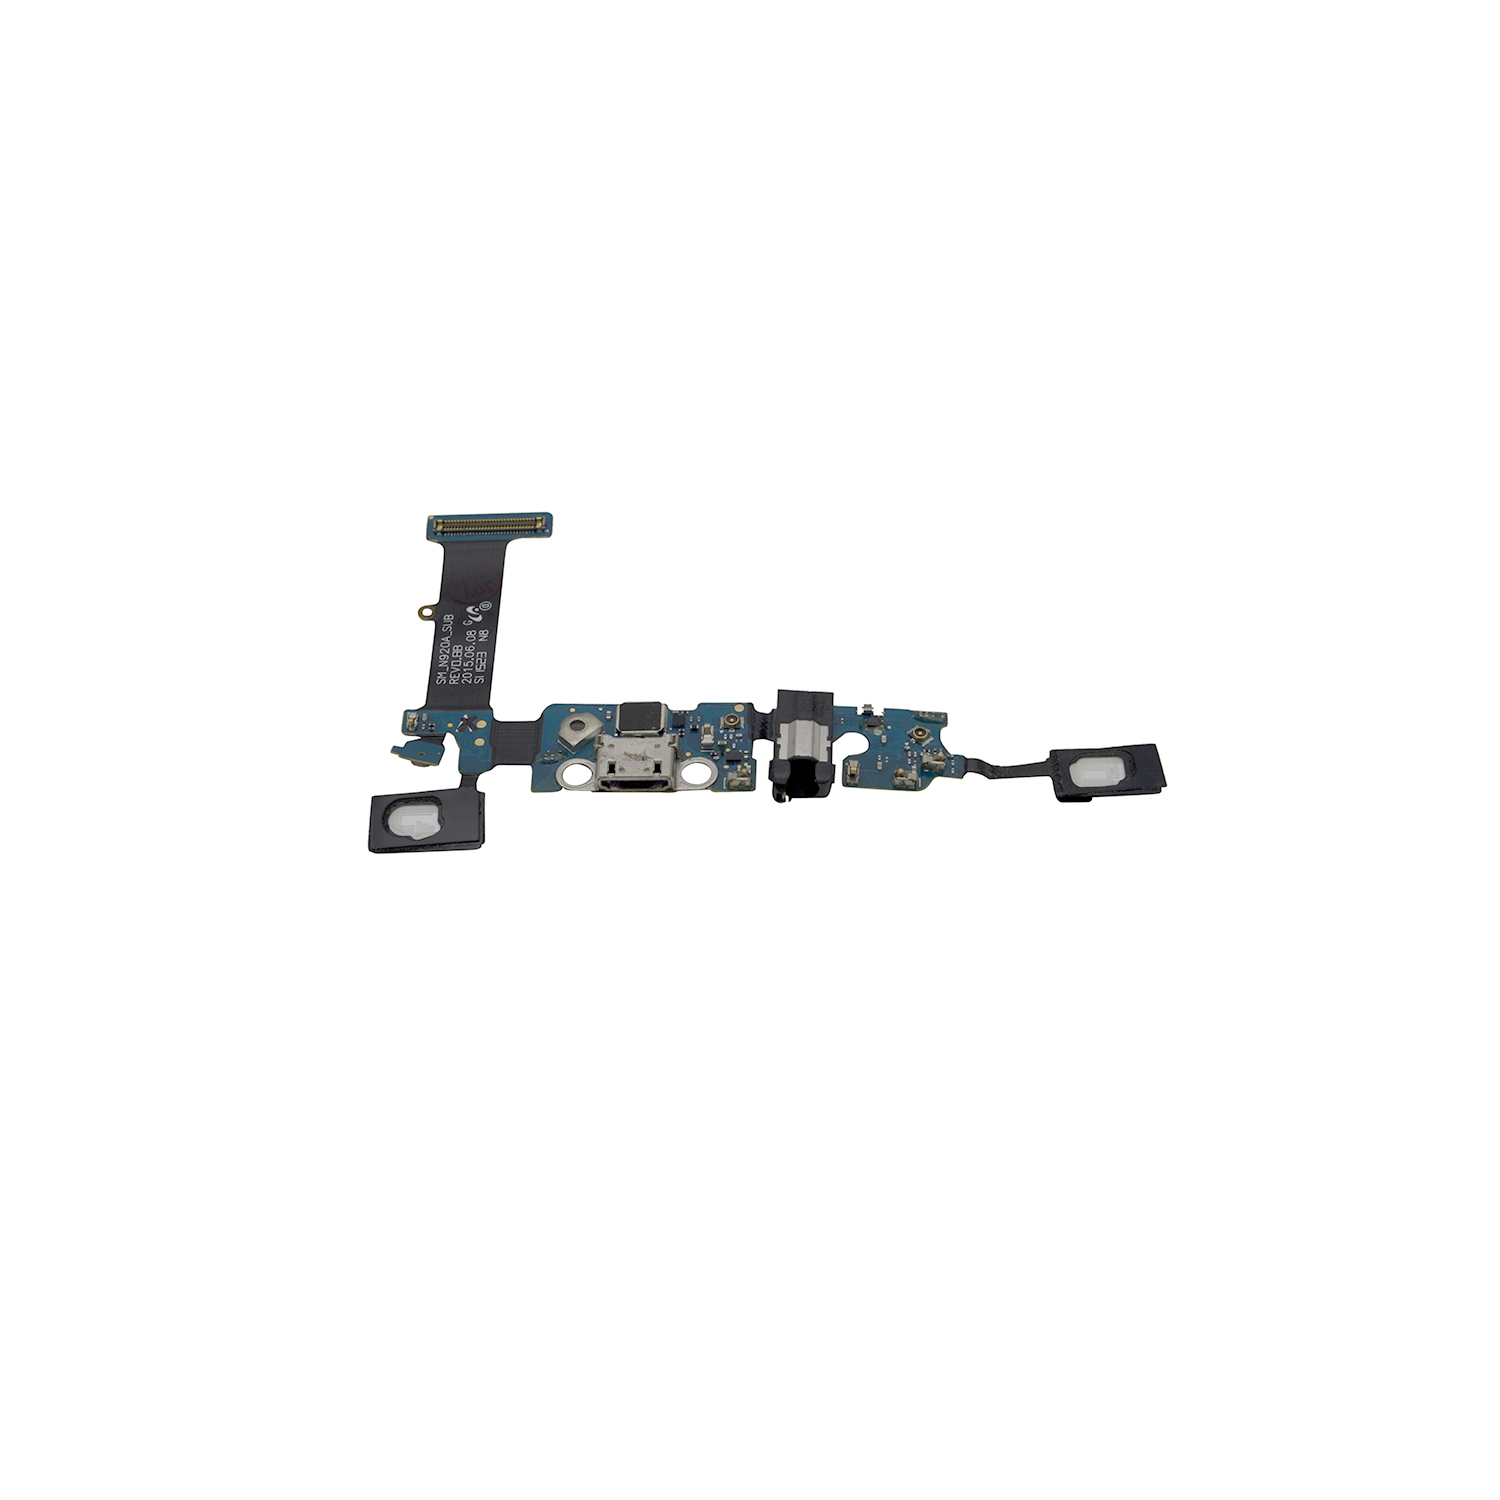 Samsung Galaxy Note 5 SM-N920A Charging Port Flex Cable Ribbon with Earphone Jack Replacement